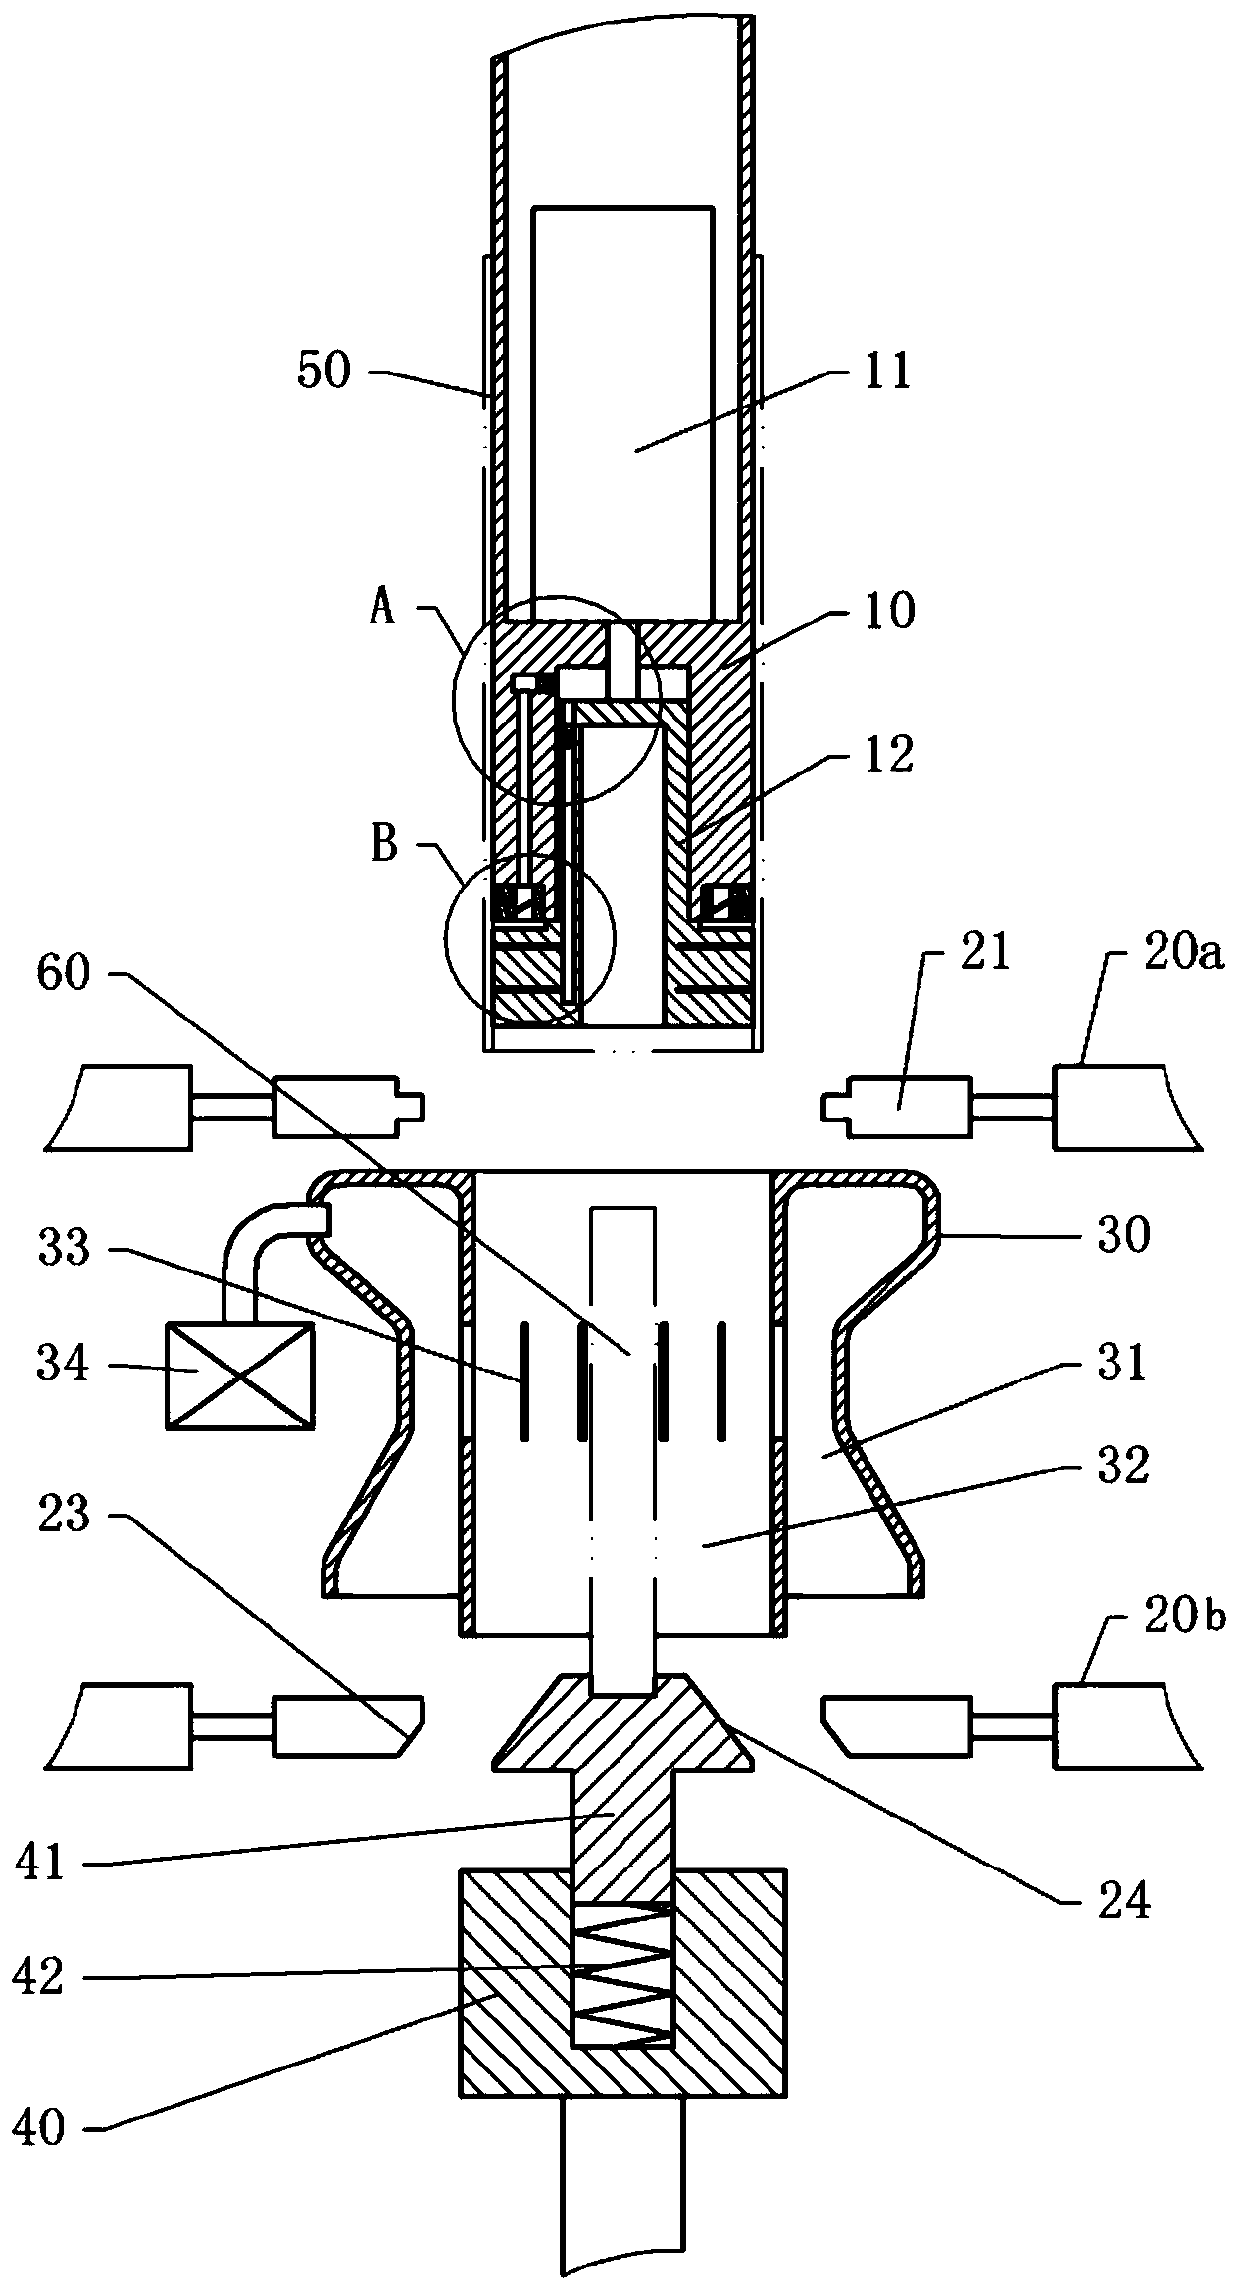 Method of packaging electronic devices